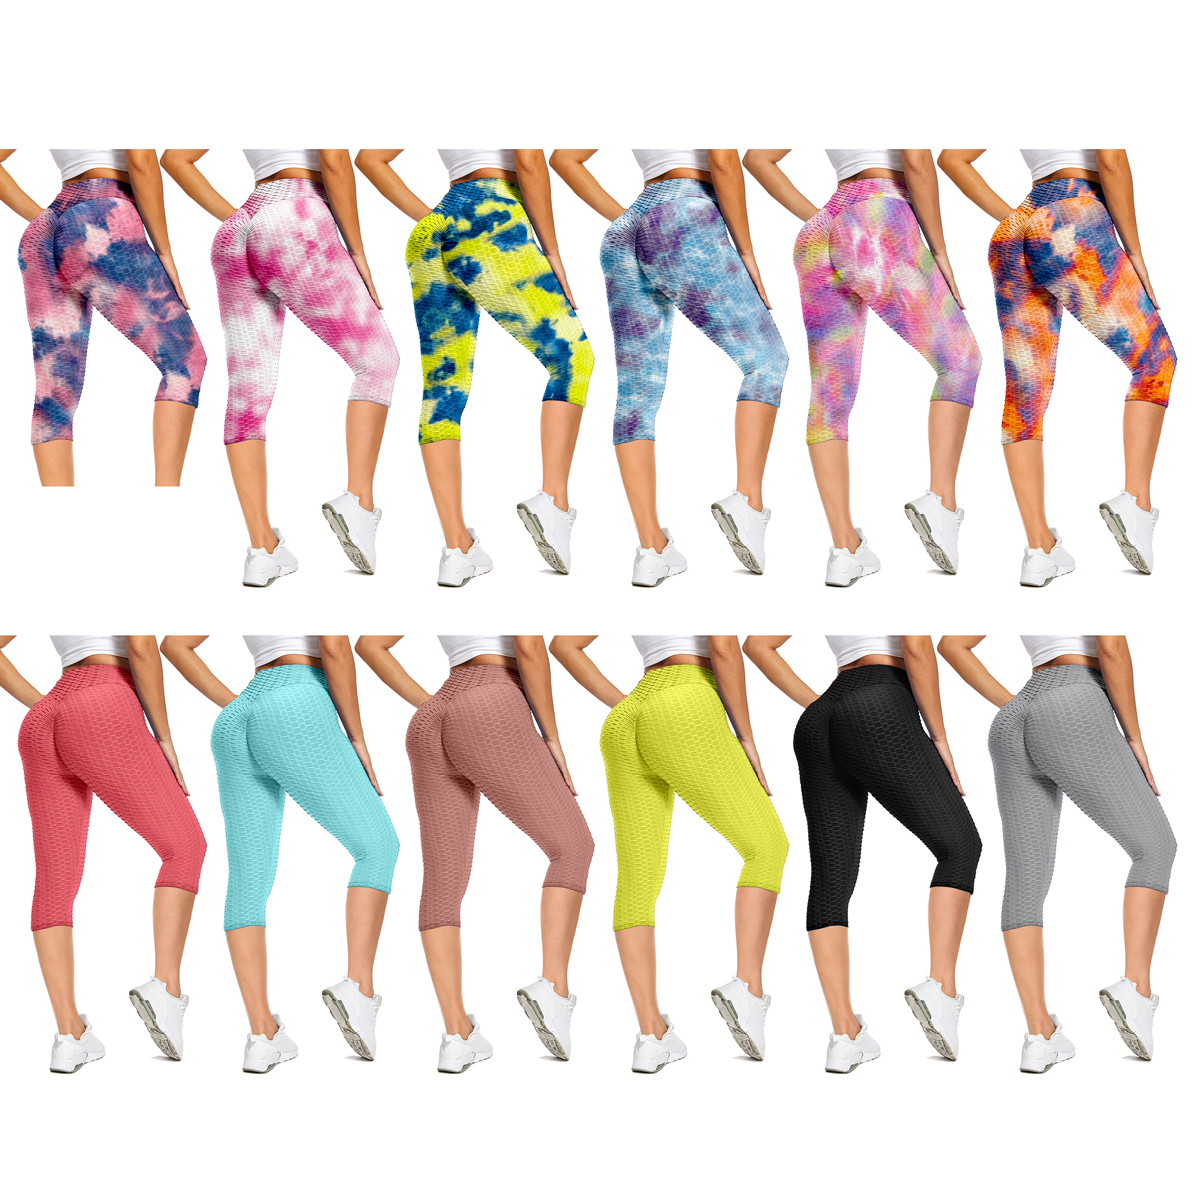 3-Pack: Women's High Waisted Anti Cellulite Leggings (Butt Lifting) - Tie-Dye, Large/X-Large